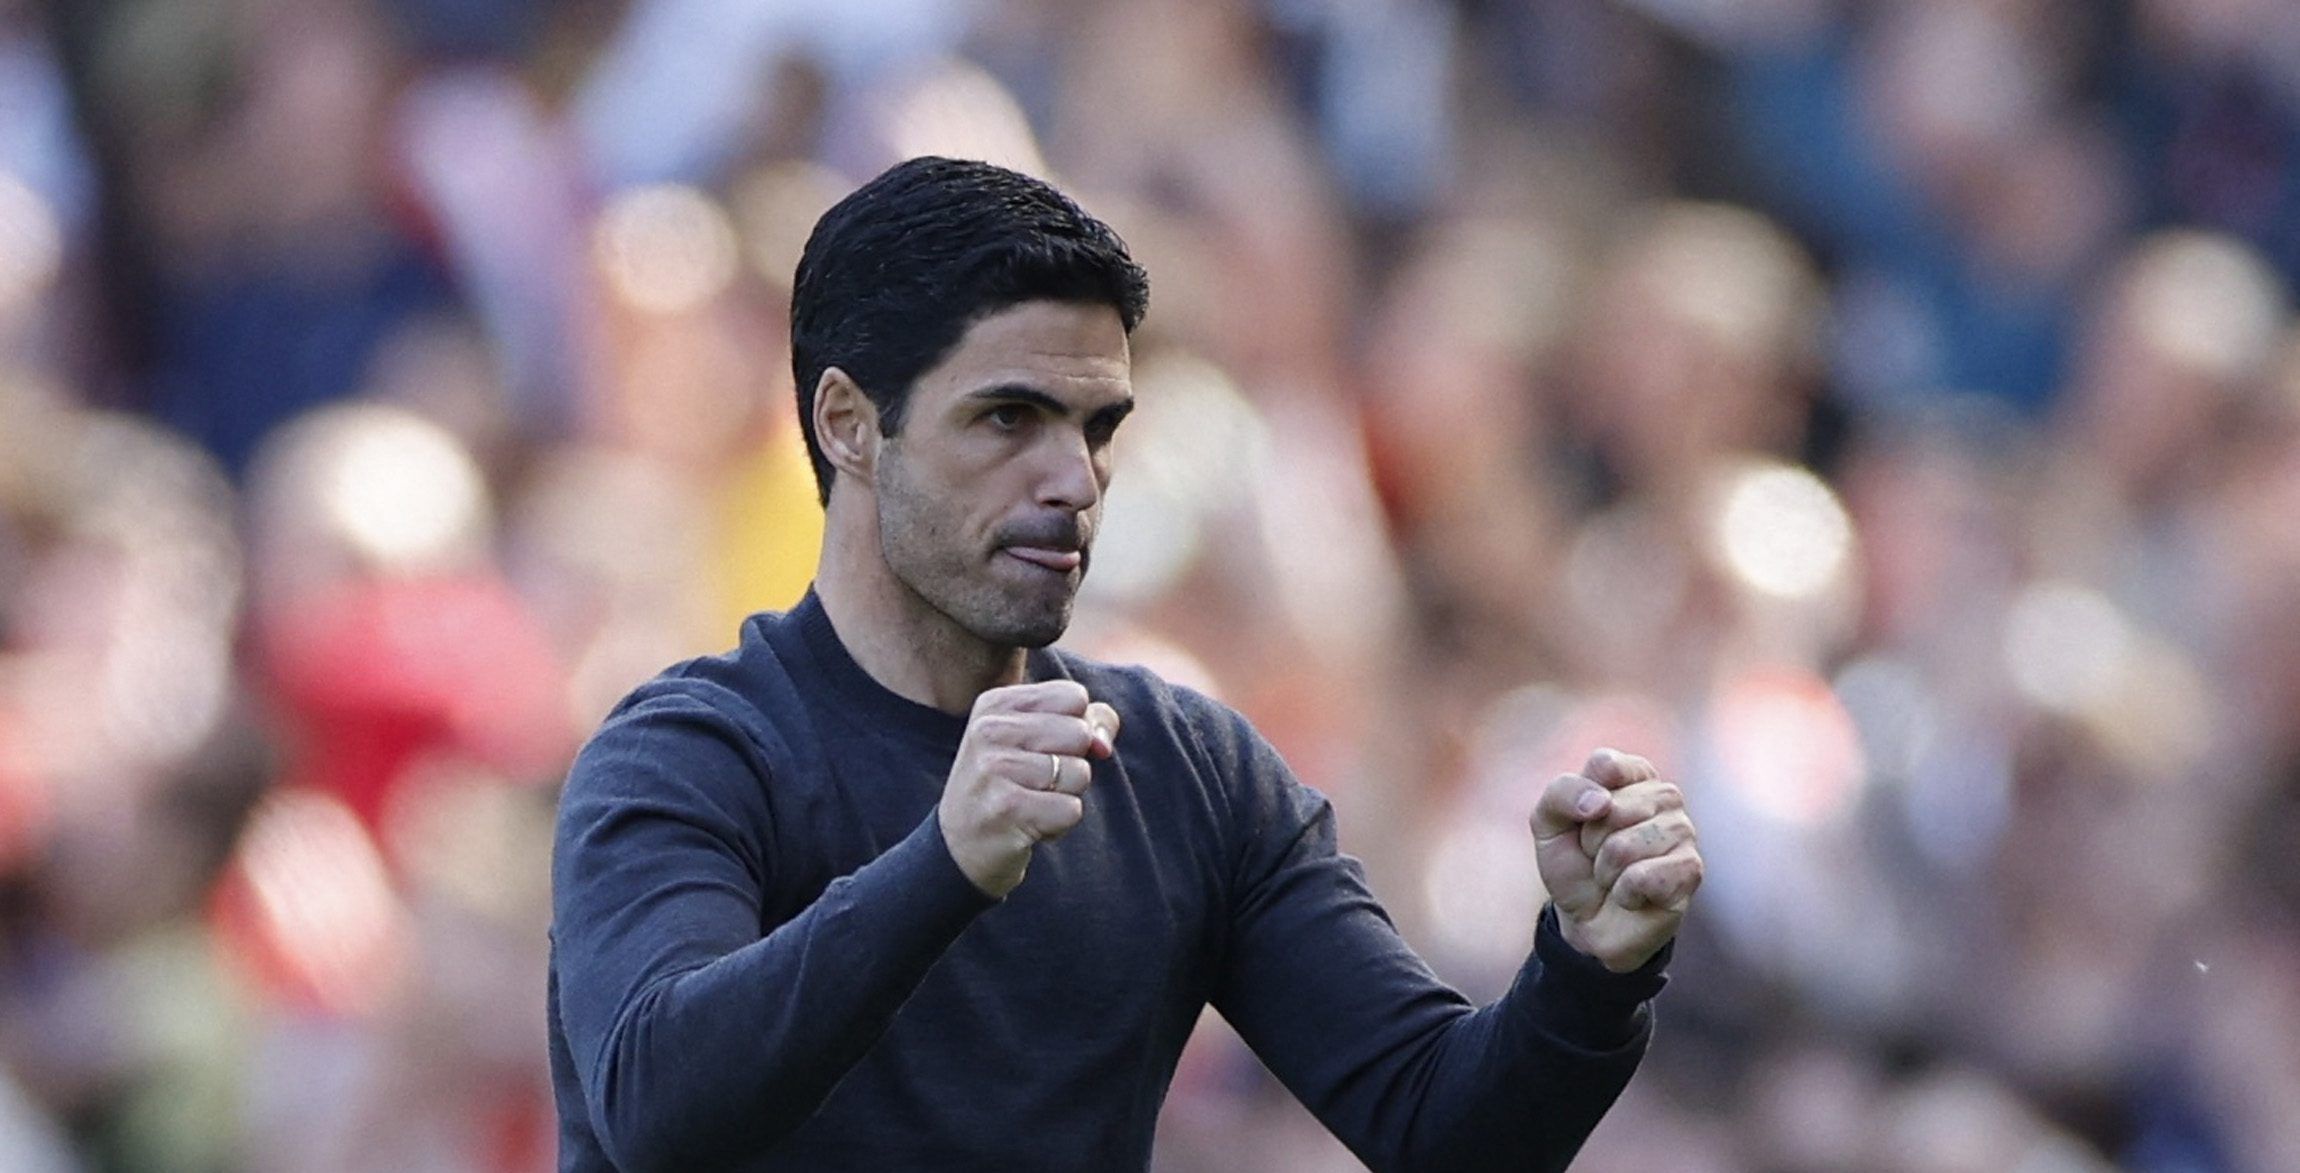 Soccer Football - Premier League - Arsenal v Leeds United - Emirates Stadium, London, Britain - May 8, 2022 Arsenal manager Mikel Arteta celebrates after the match Action Images via Reuters/John Sibley EDITORIAL USE ONLY. No use with unauthorized audio, video, data, fixture lists, club/league logos or 'live' services. Online in-match use limited to 75 images, no video emulation. No use in betting, games or single club /league/player publications.  Please contact your account representative for f